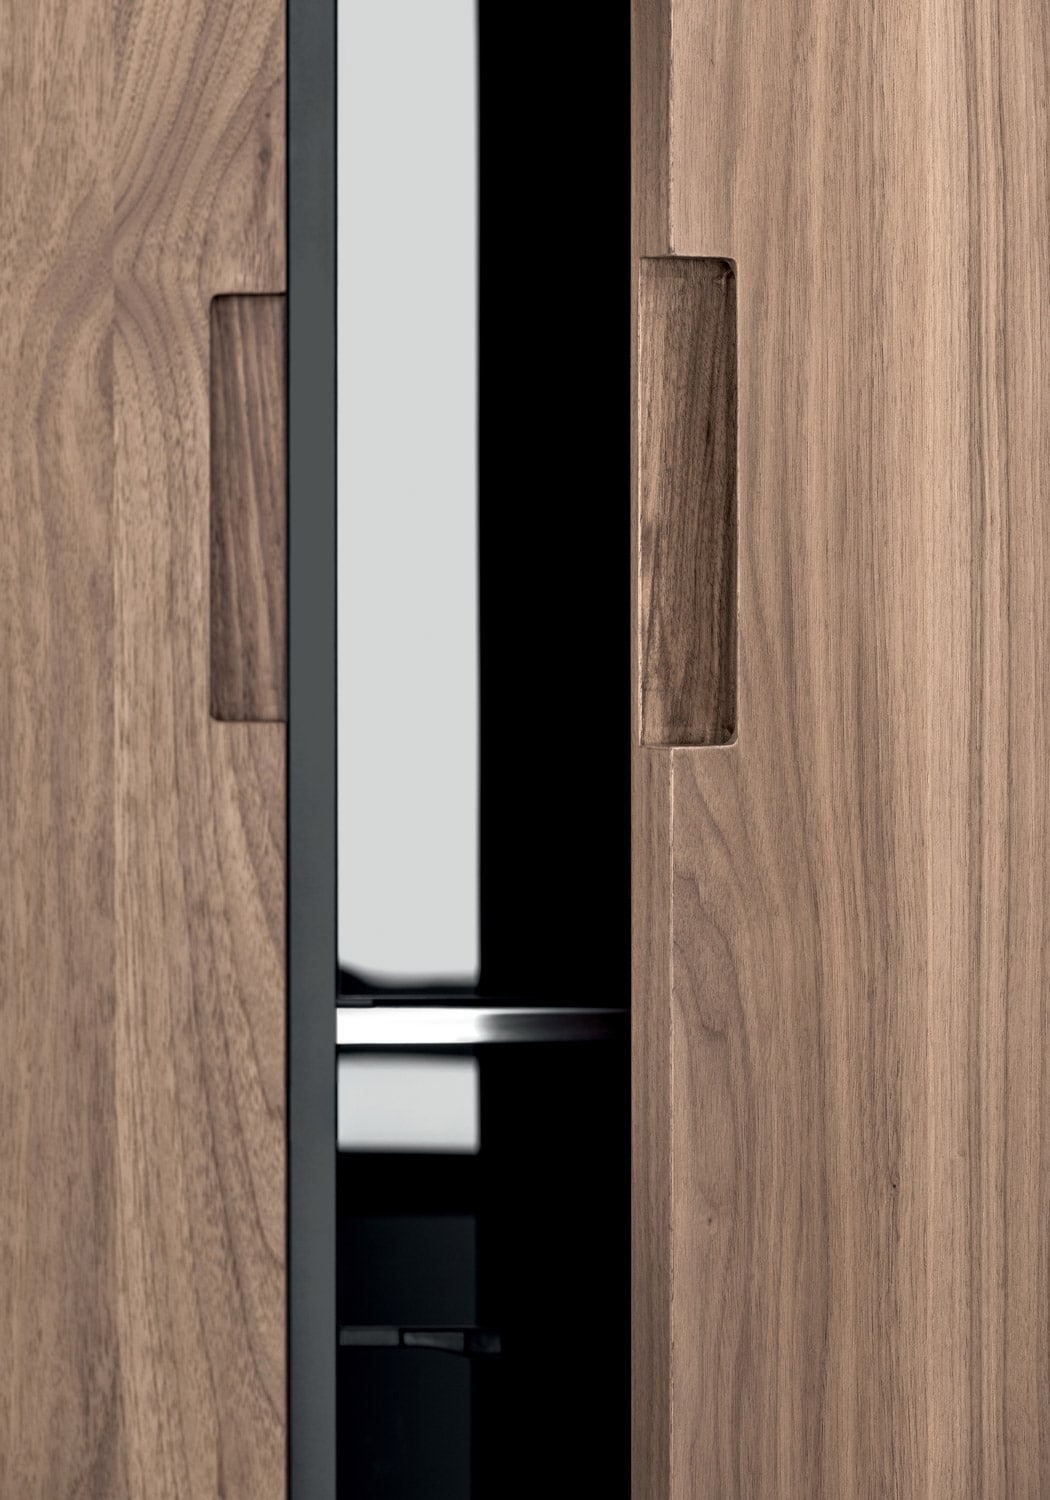 The recessed Shell handle can be used on vertical and horizontal cabinets, on both sides or just one side, and in various lengths to create the desired aesthetic effect.